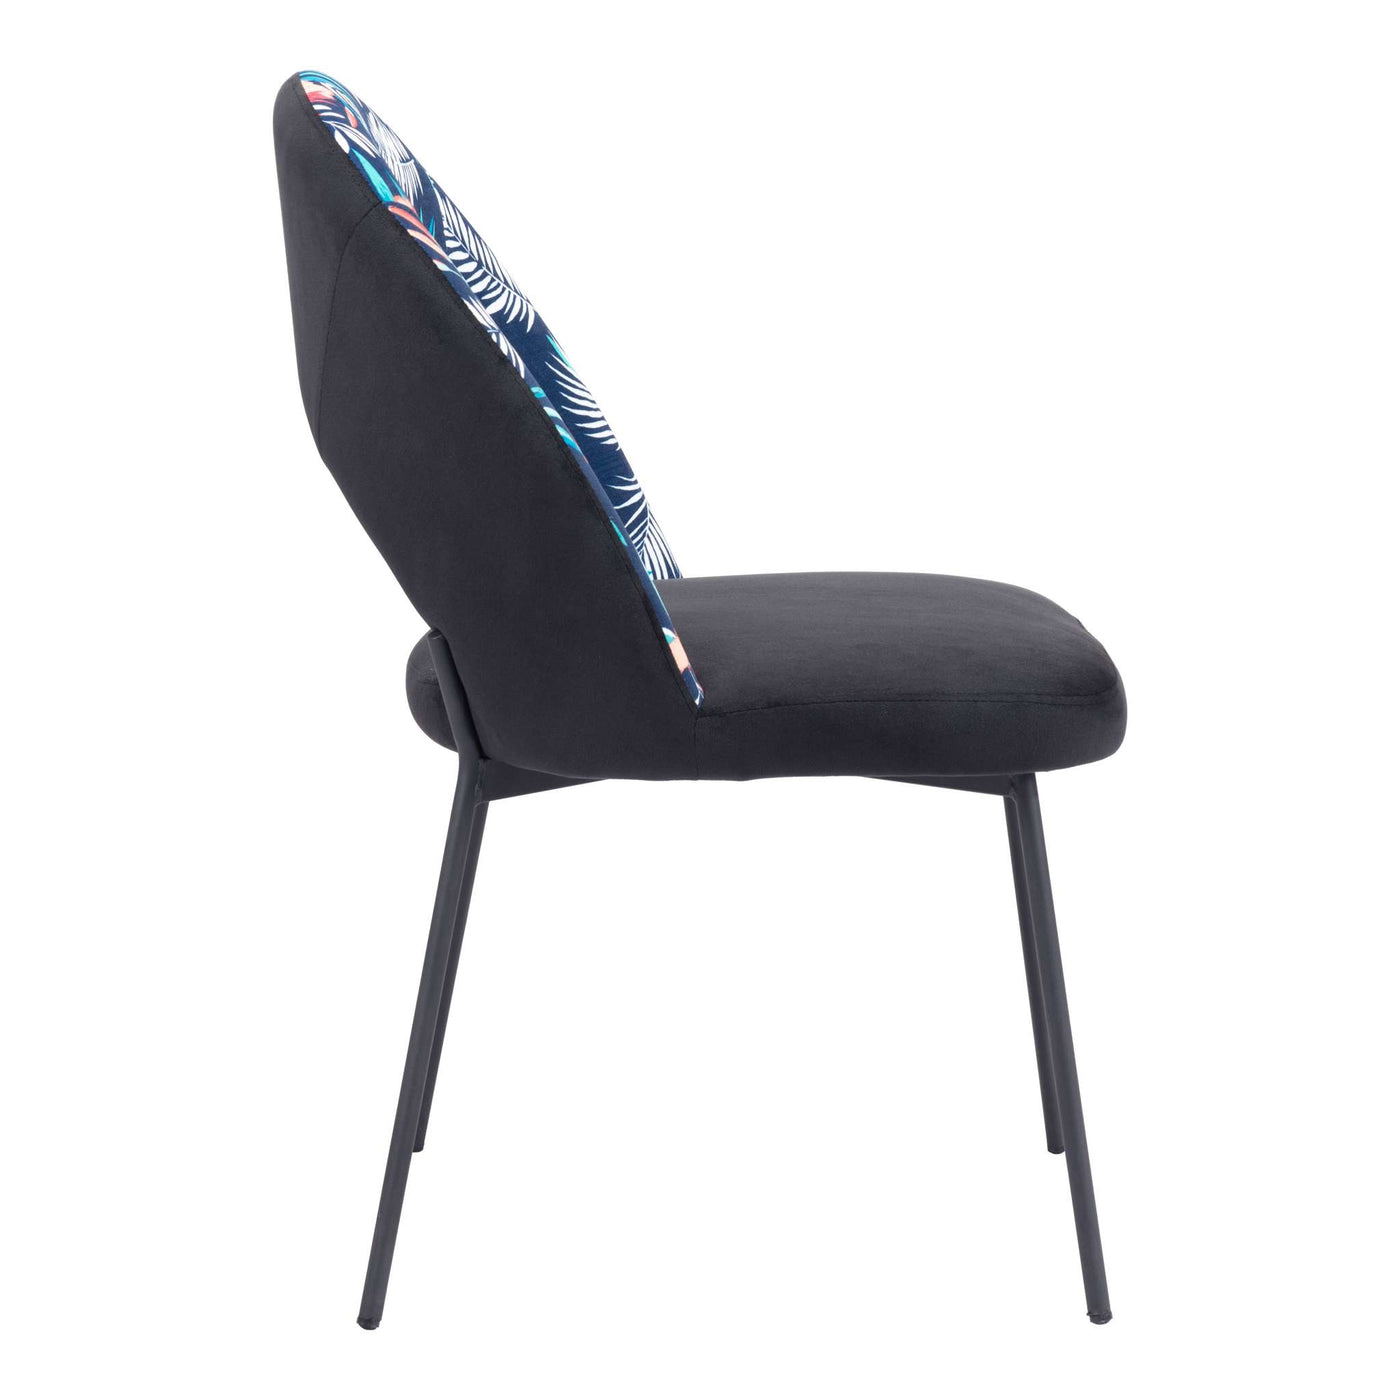 Zuo Mod Merion Dining Chair